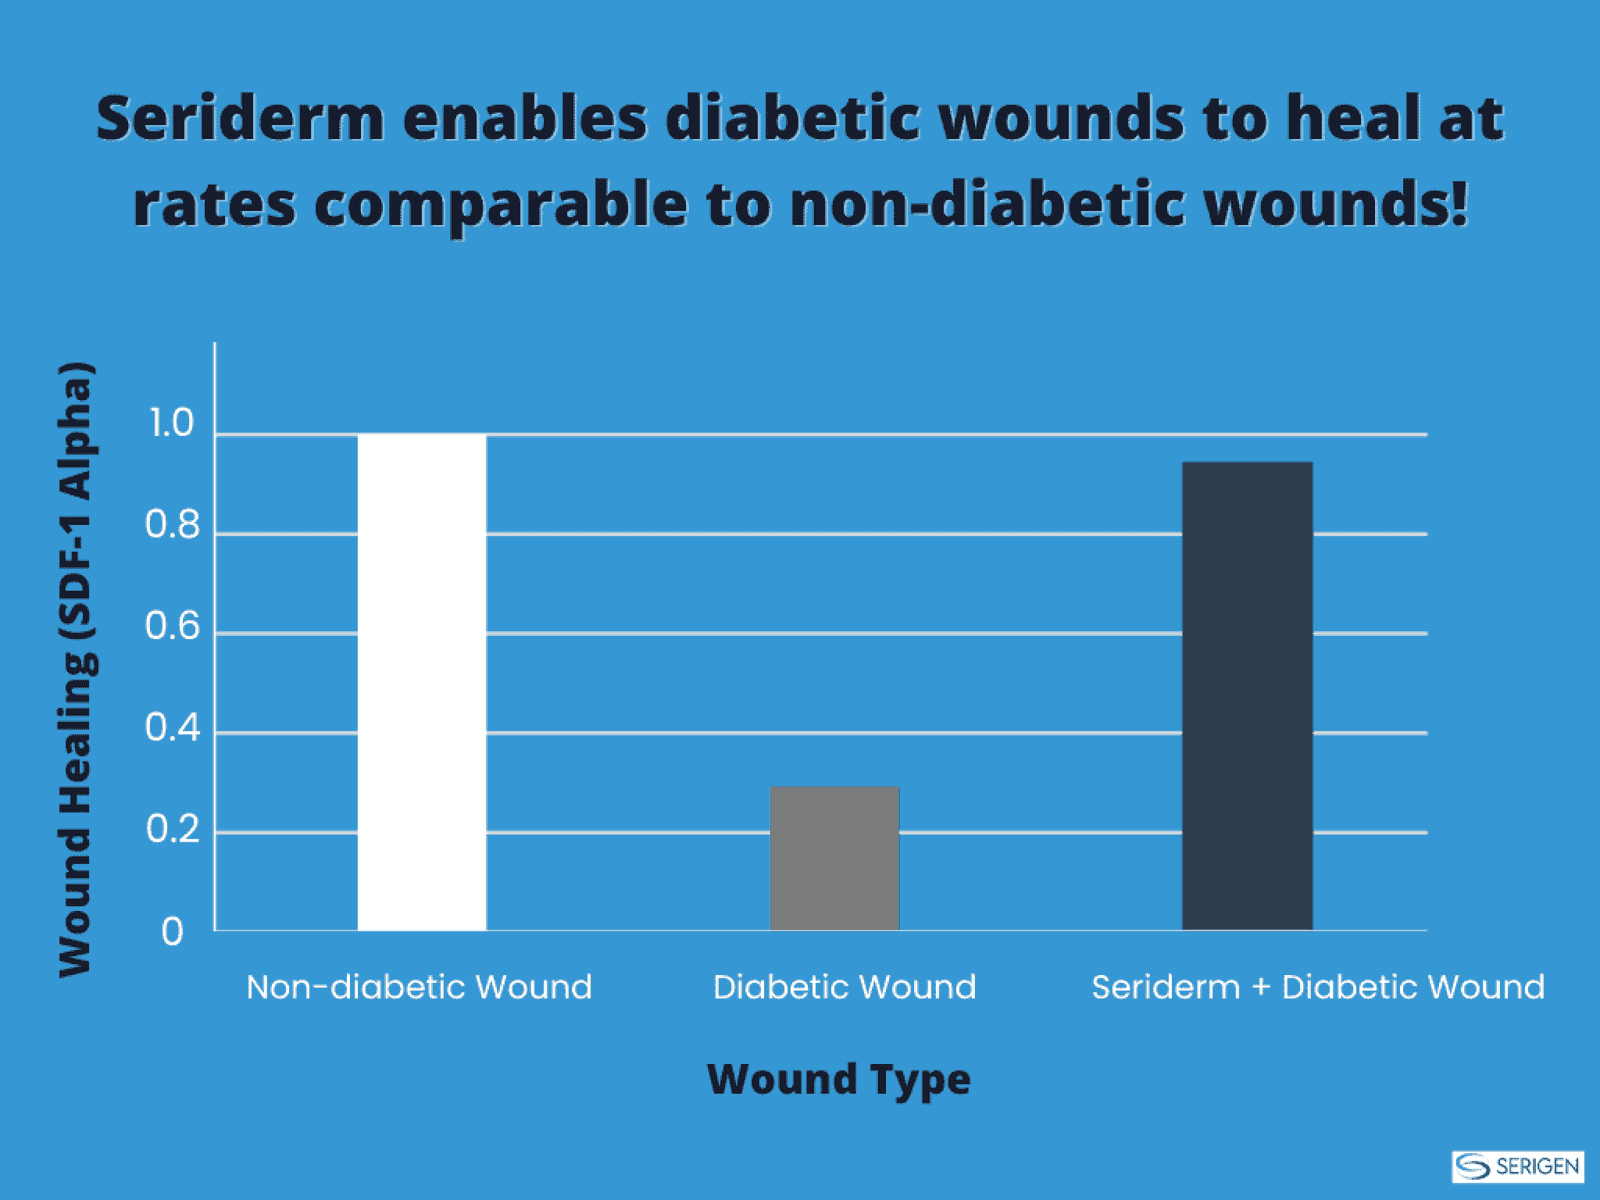 Seriderm - Faster healing for diabetic wounds